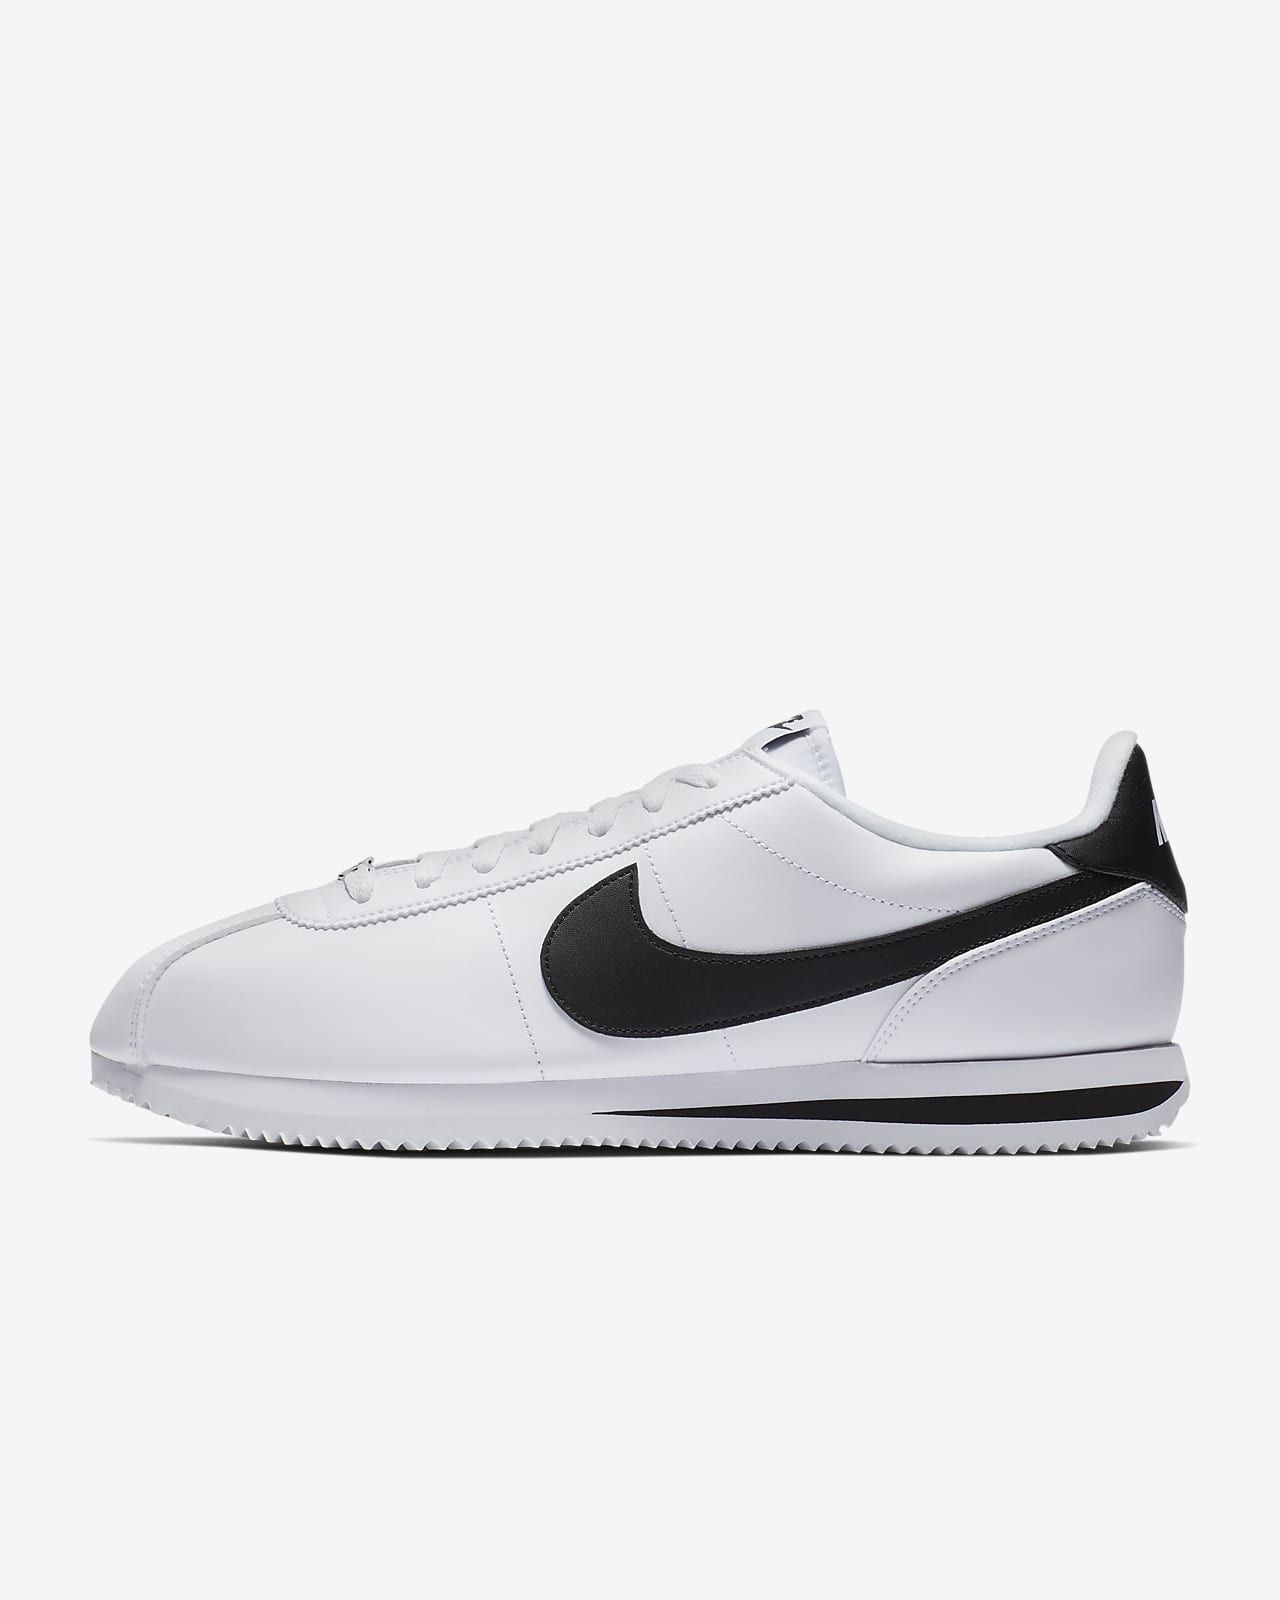 the first nike cortez